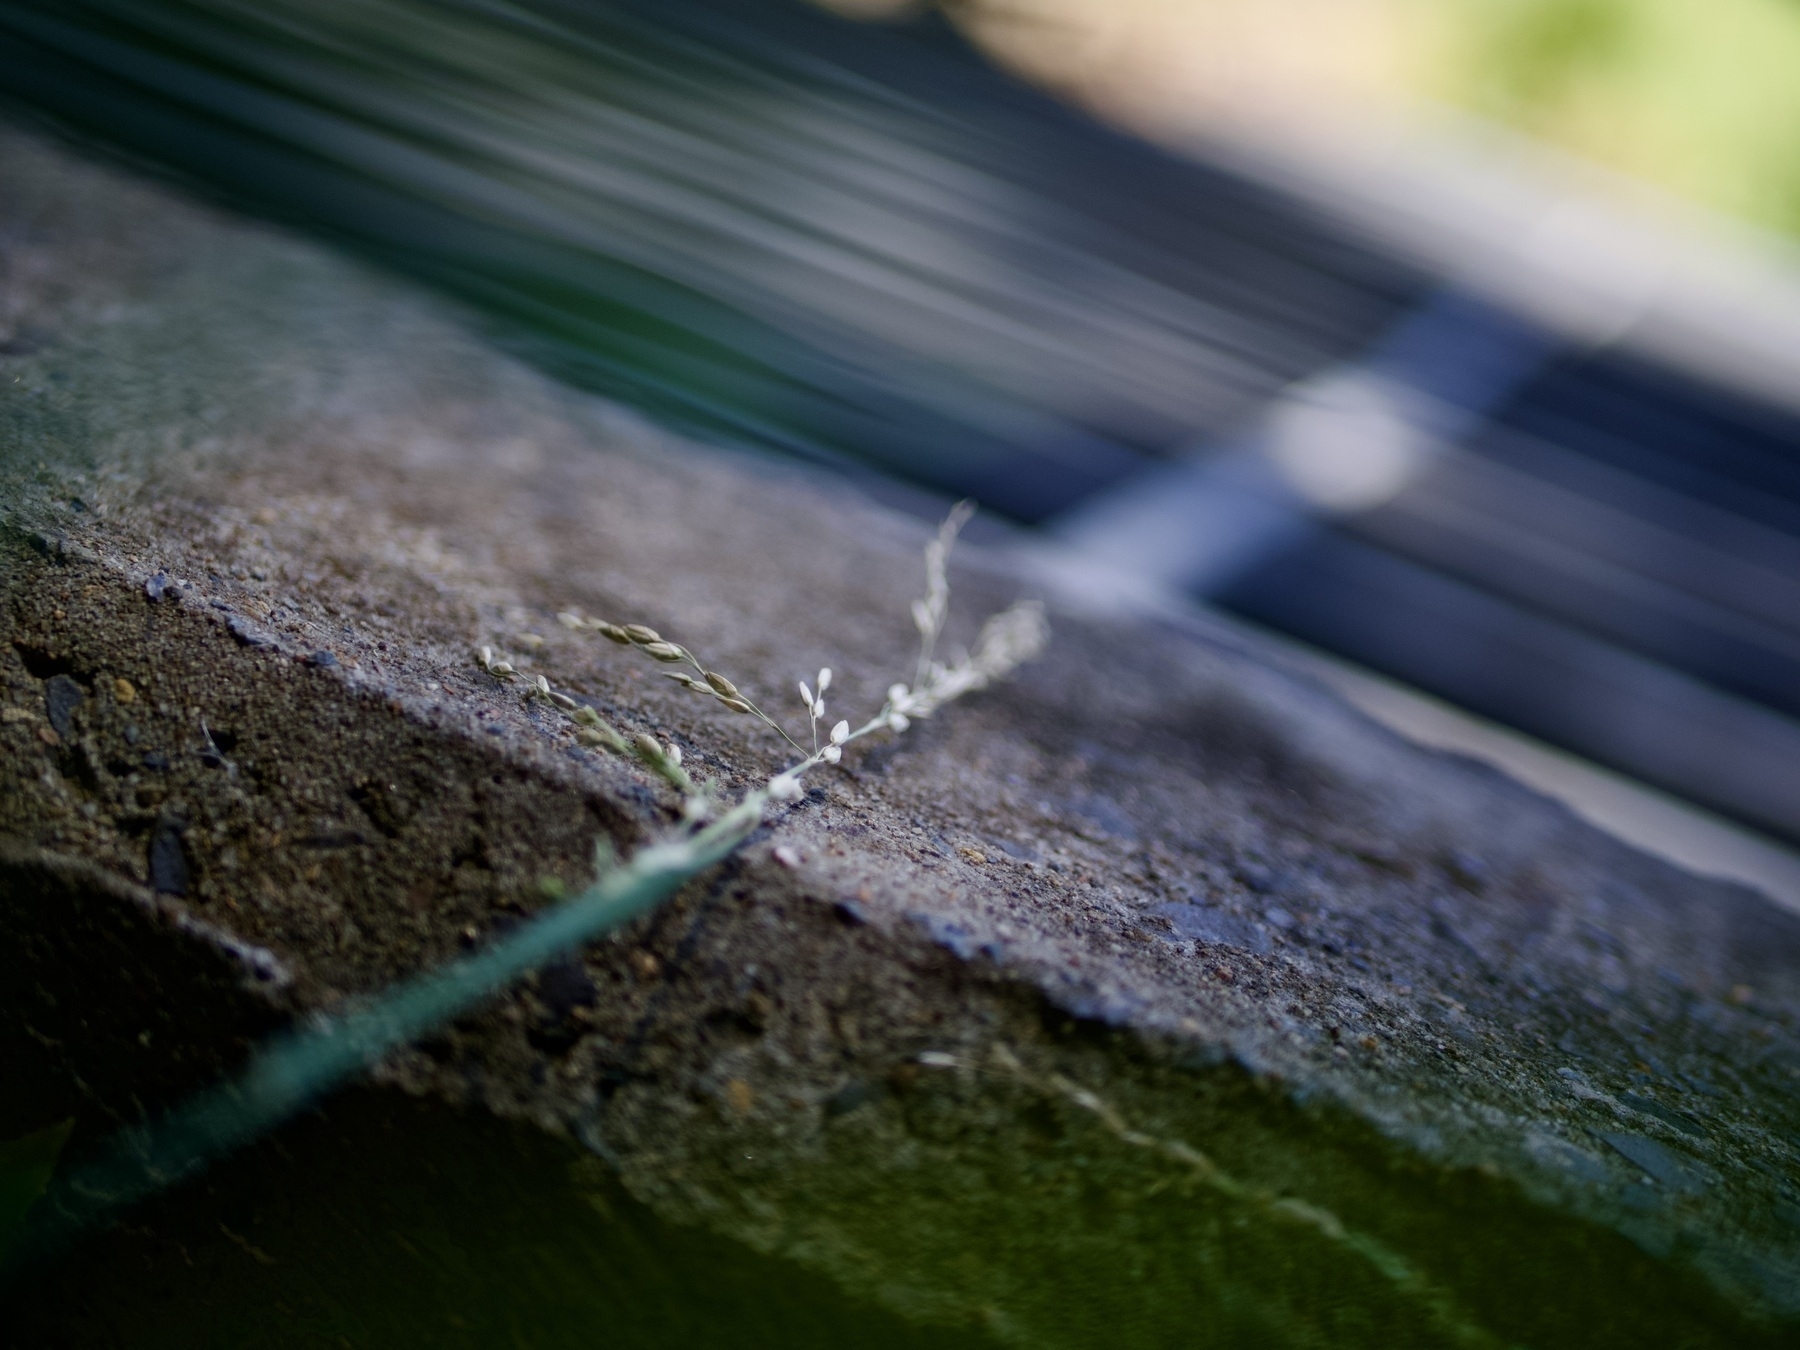 A stem of grass extends across concrete, with a leading line into a steel grate.